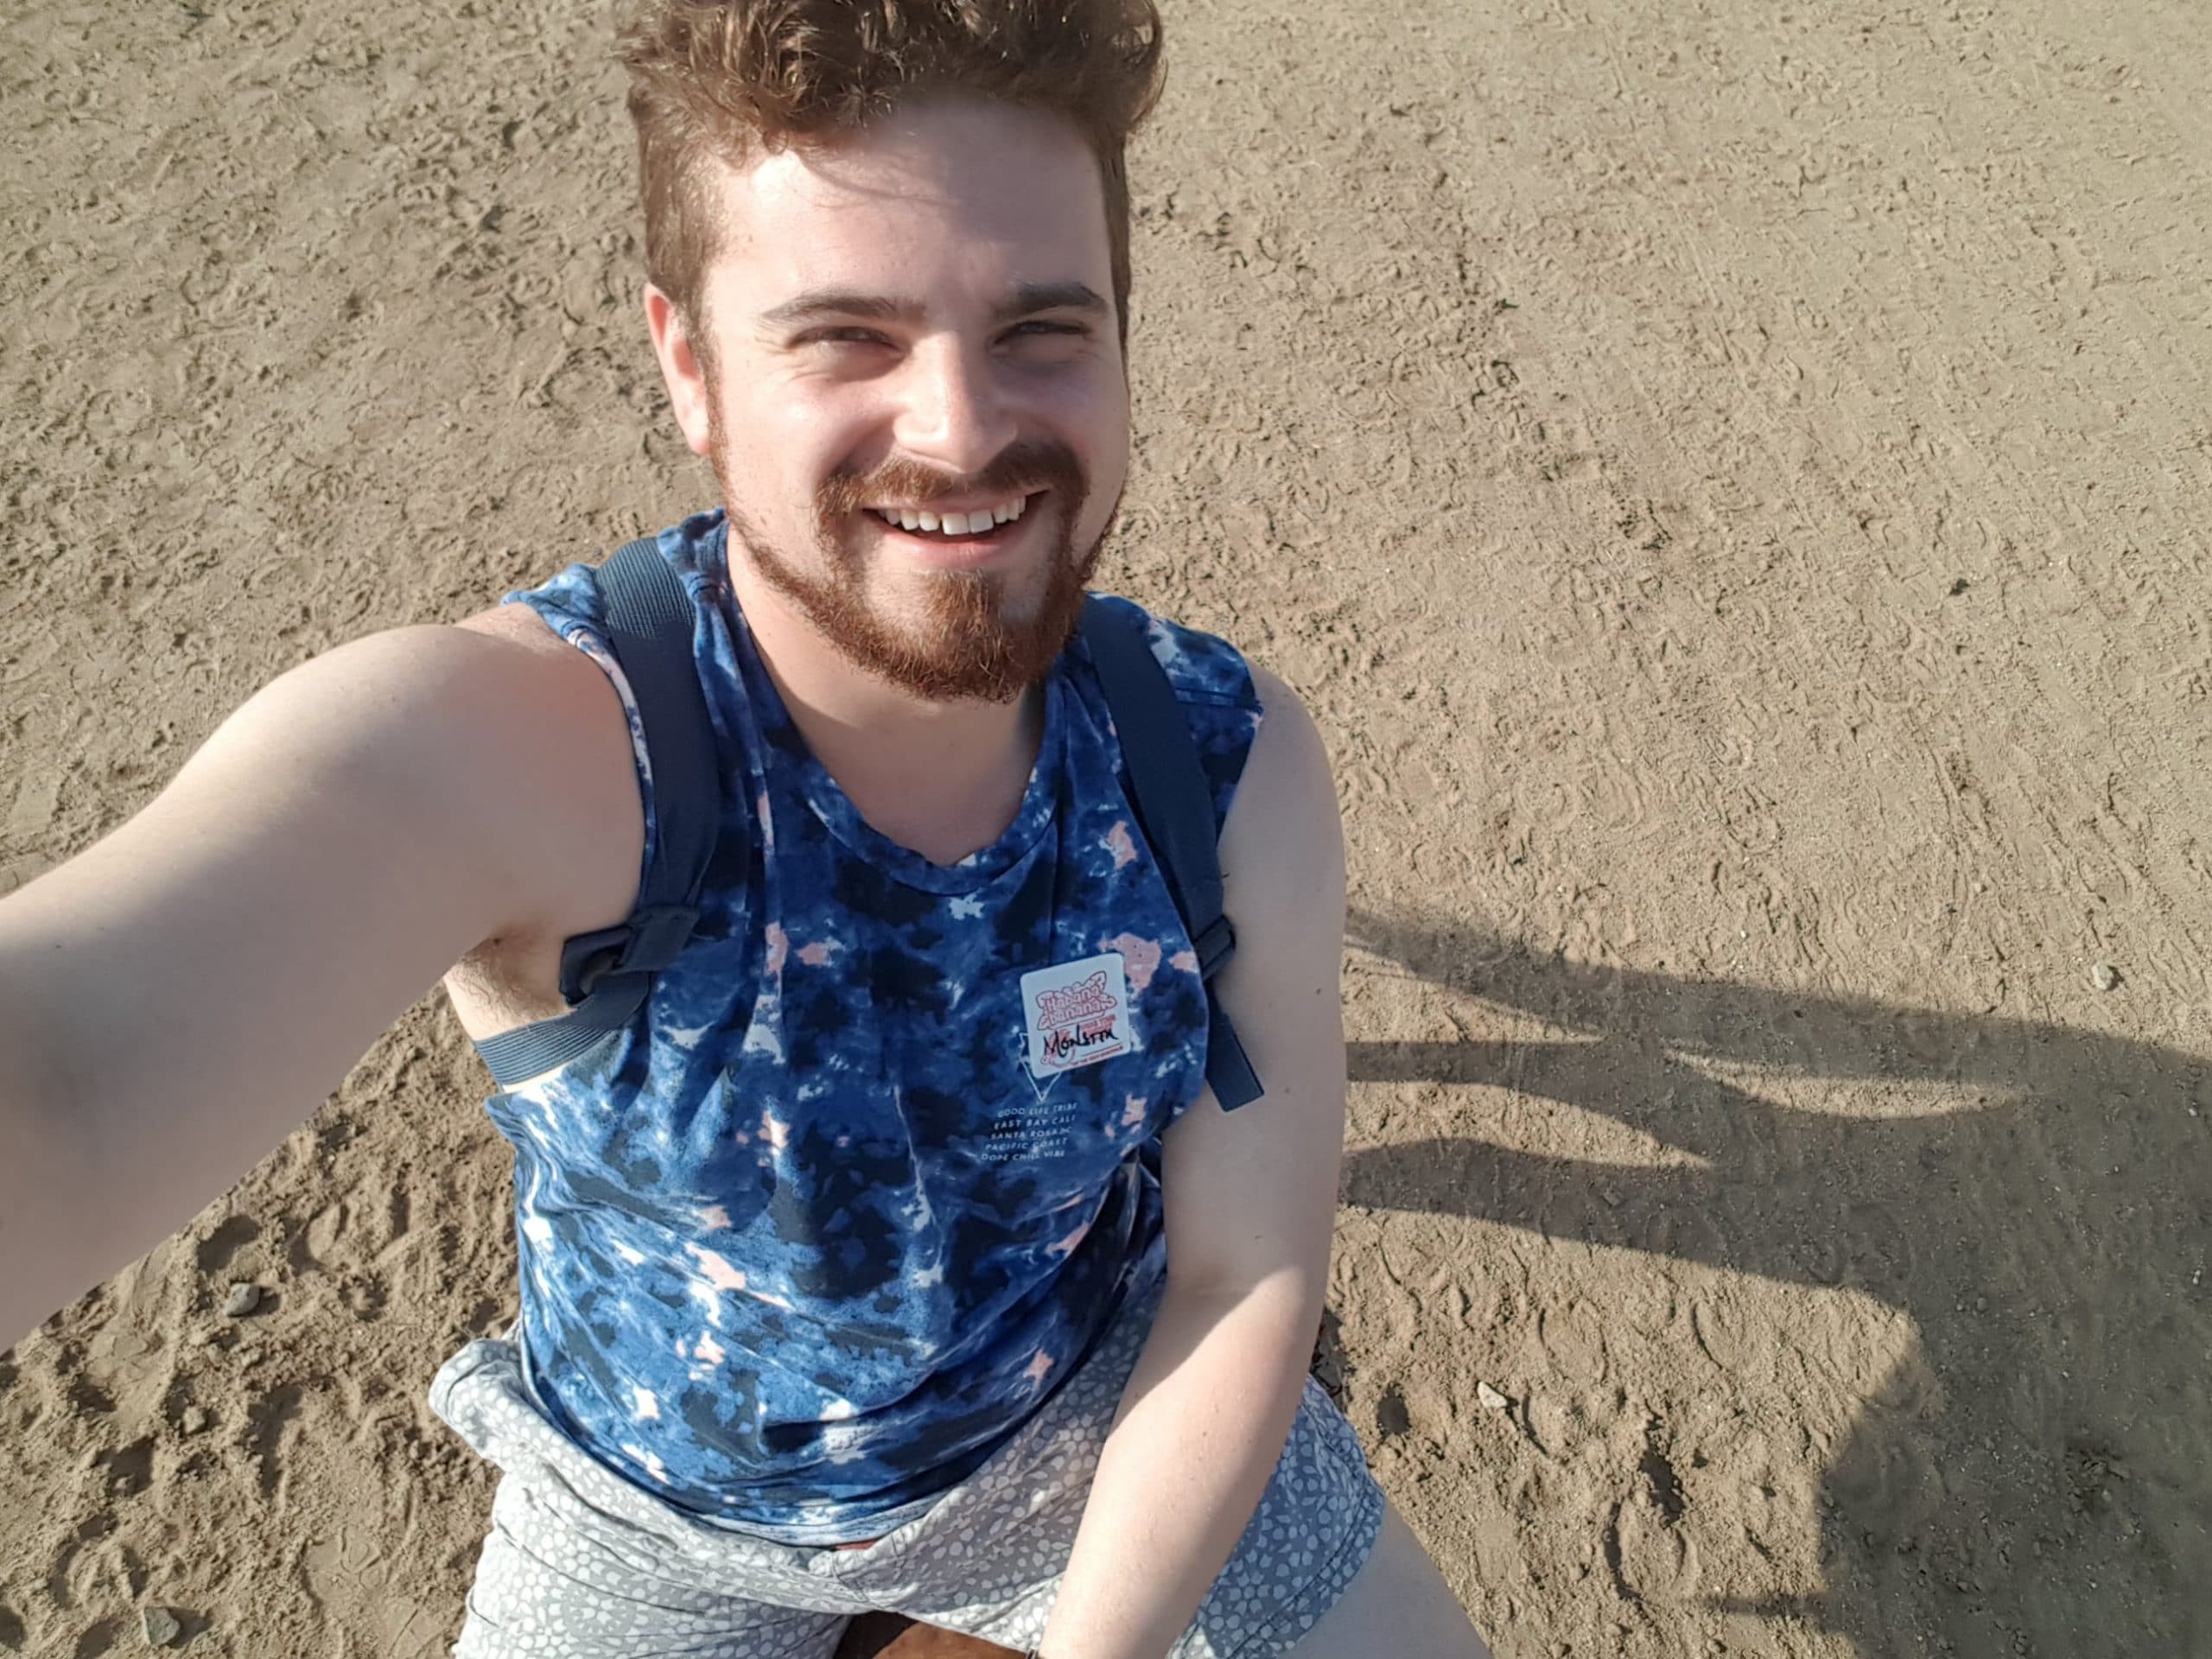 Nathan smiling while on a beach riding a horse